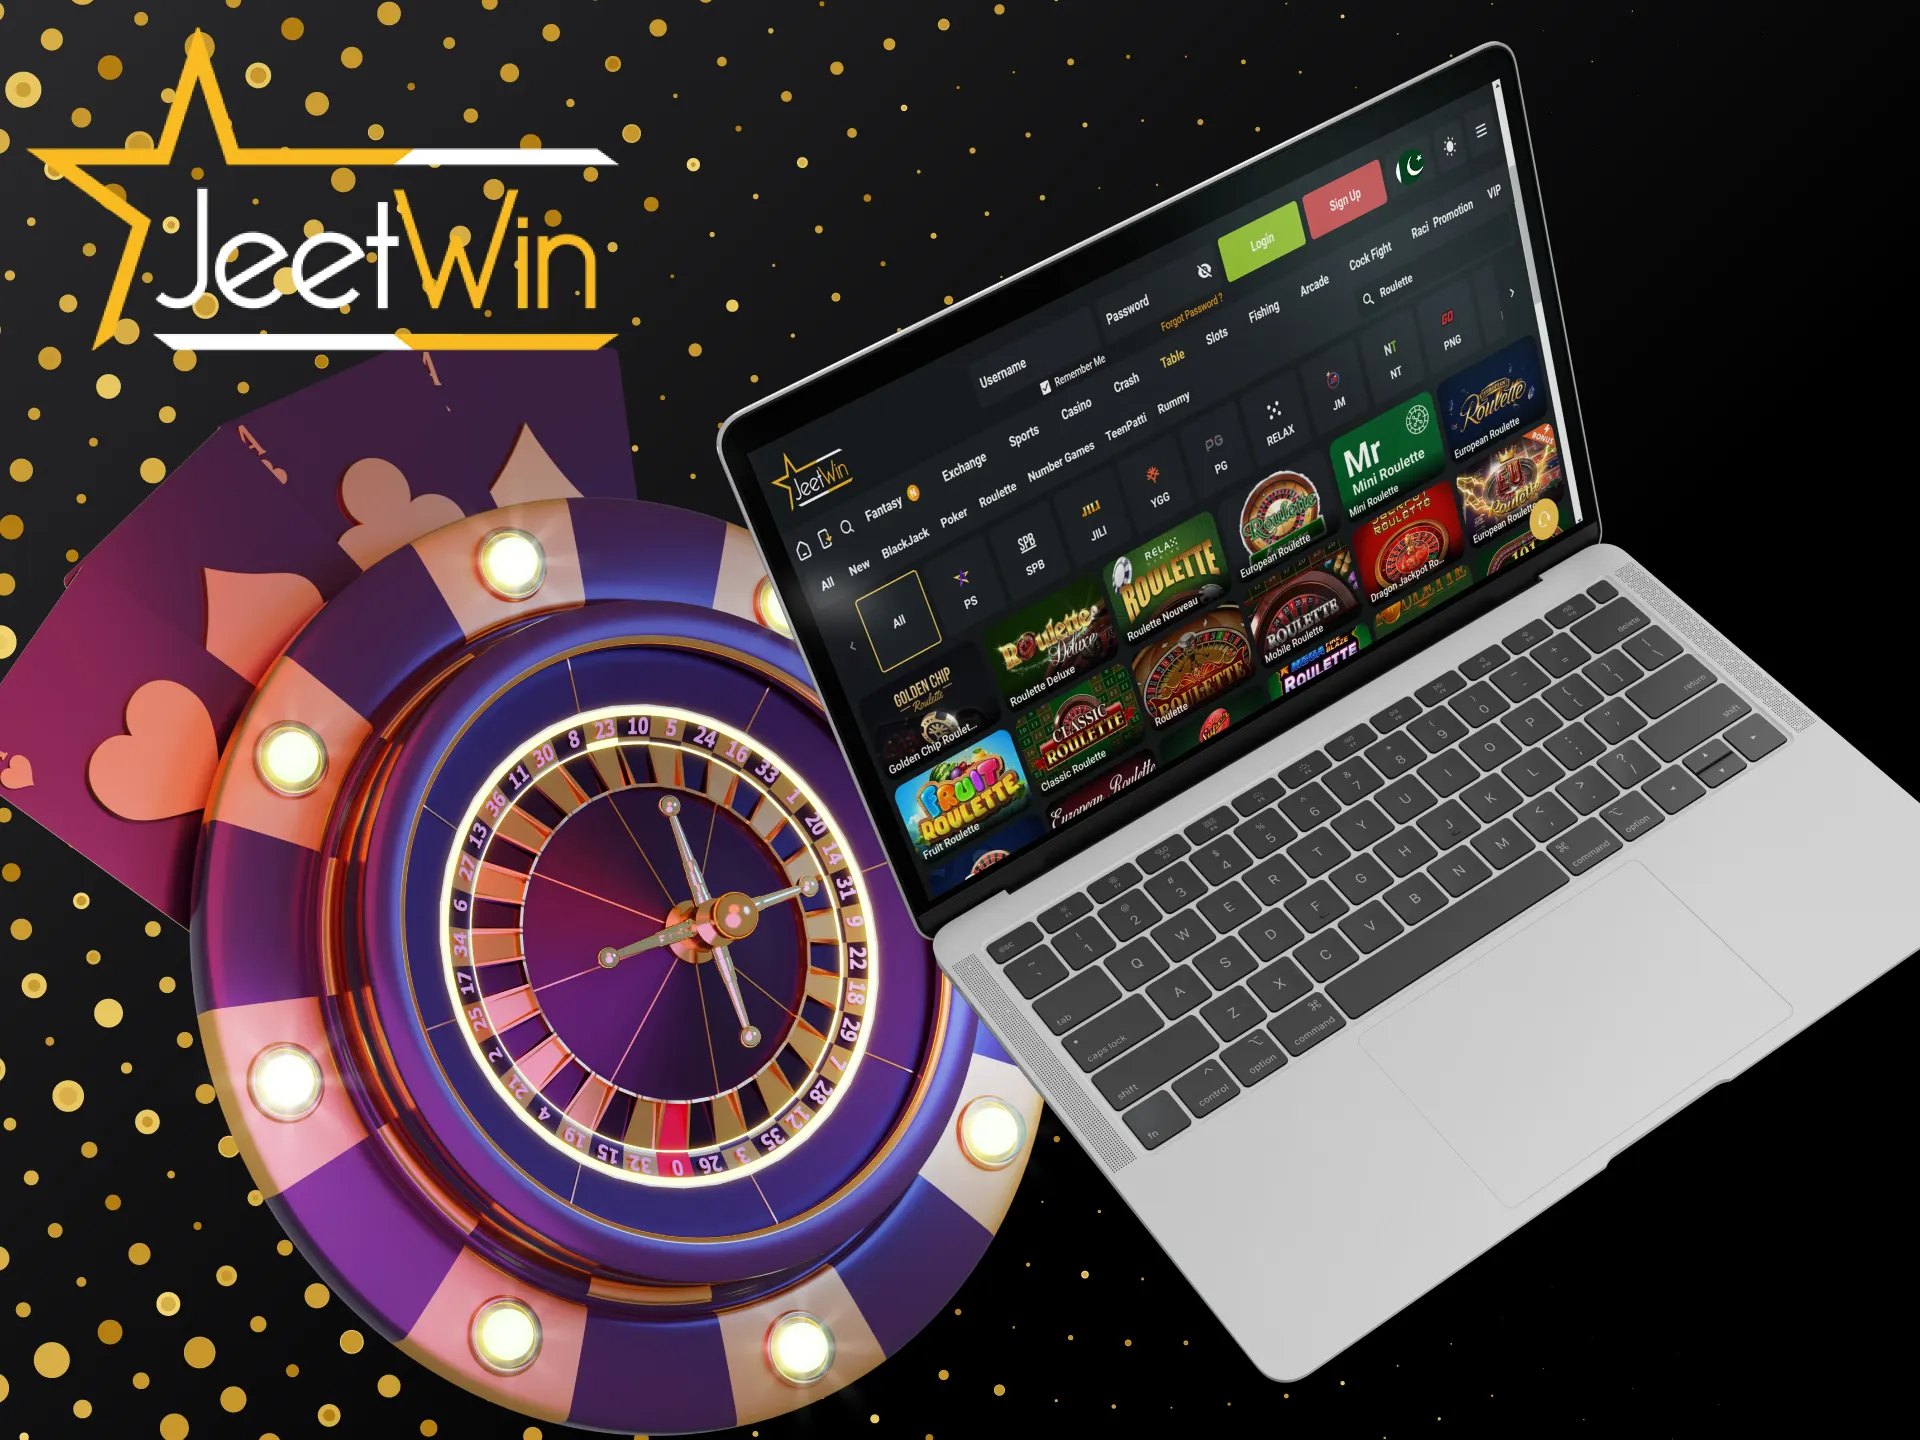 Sign up at JeetWin and try your luck spinning the wheel at roulette.